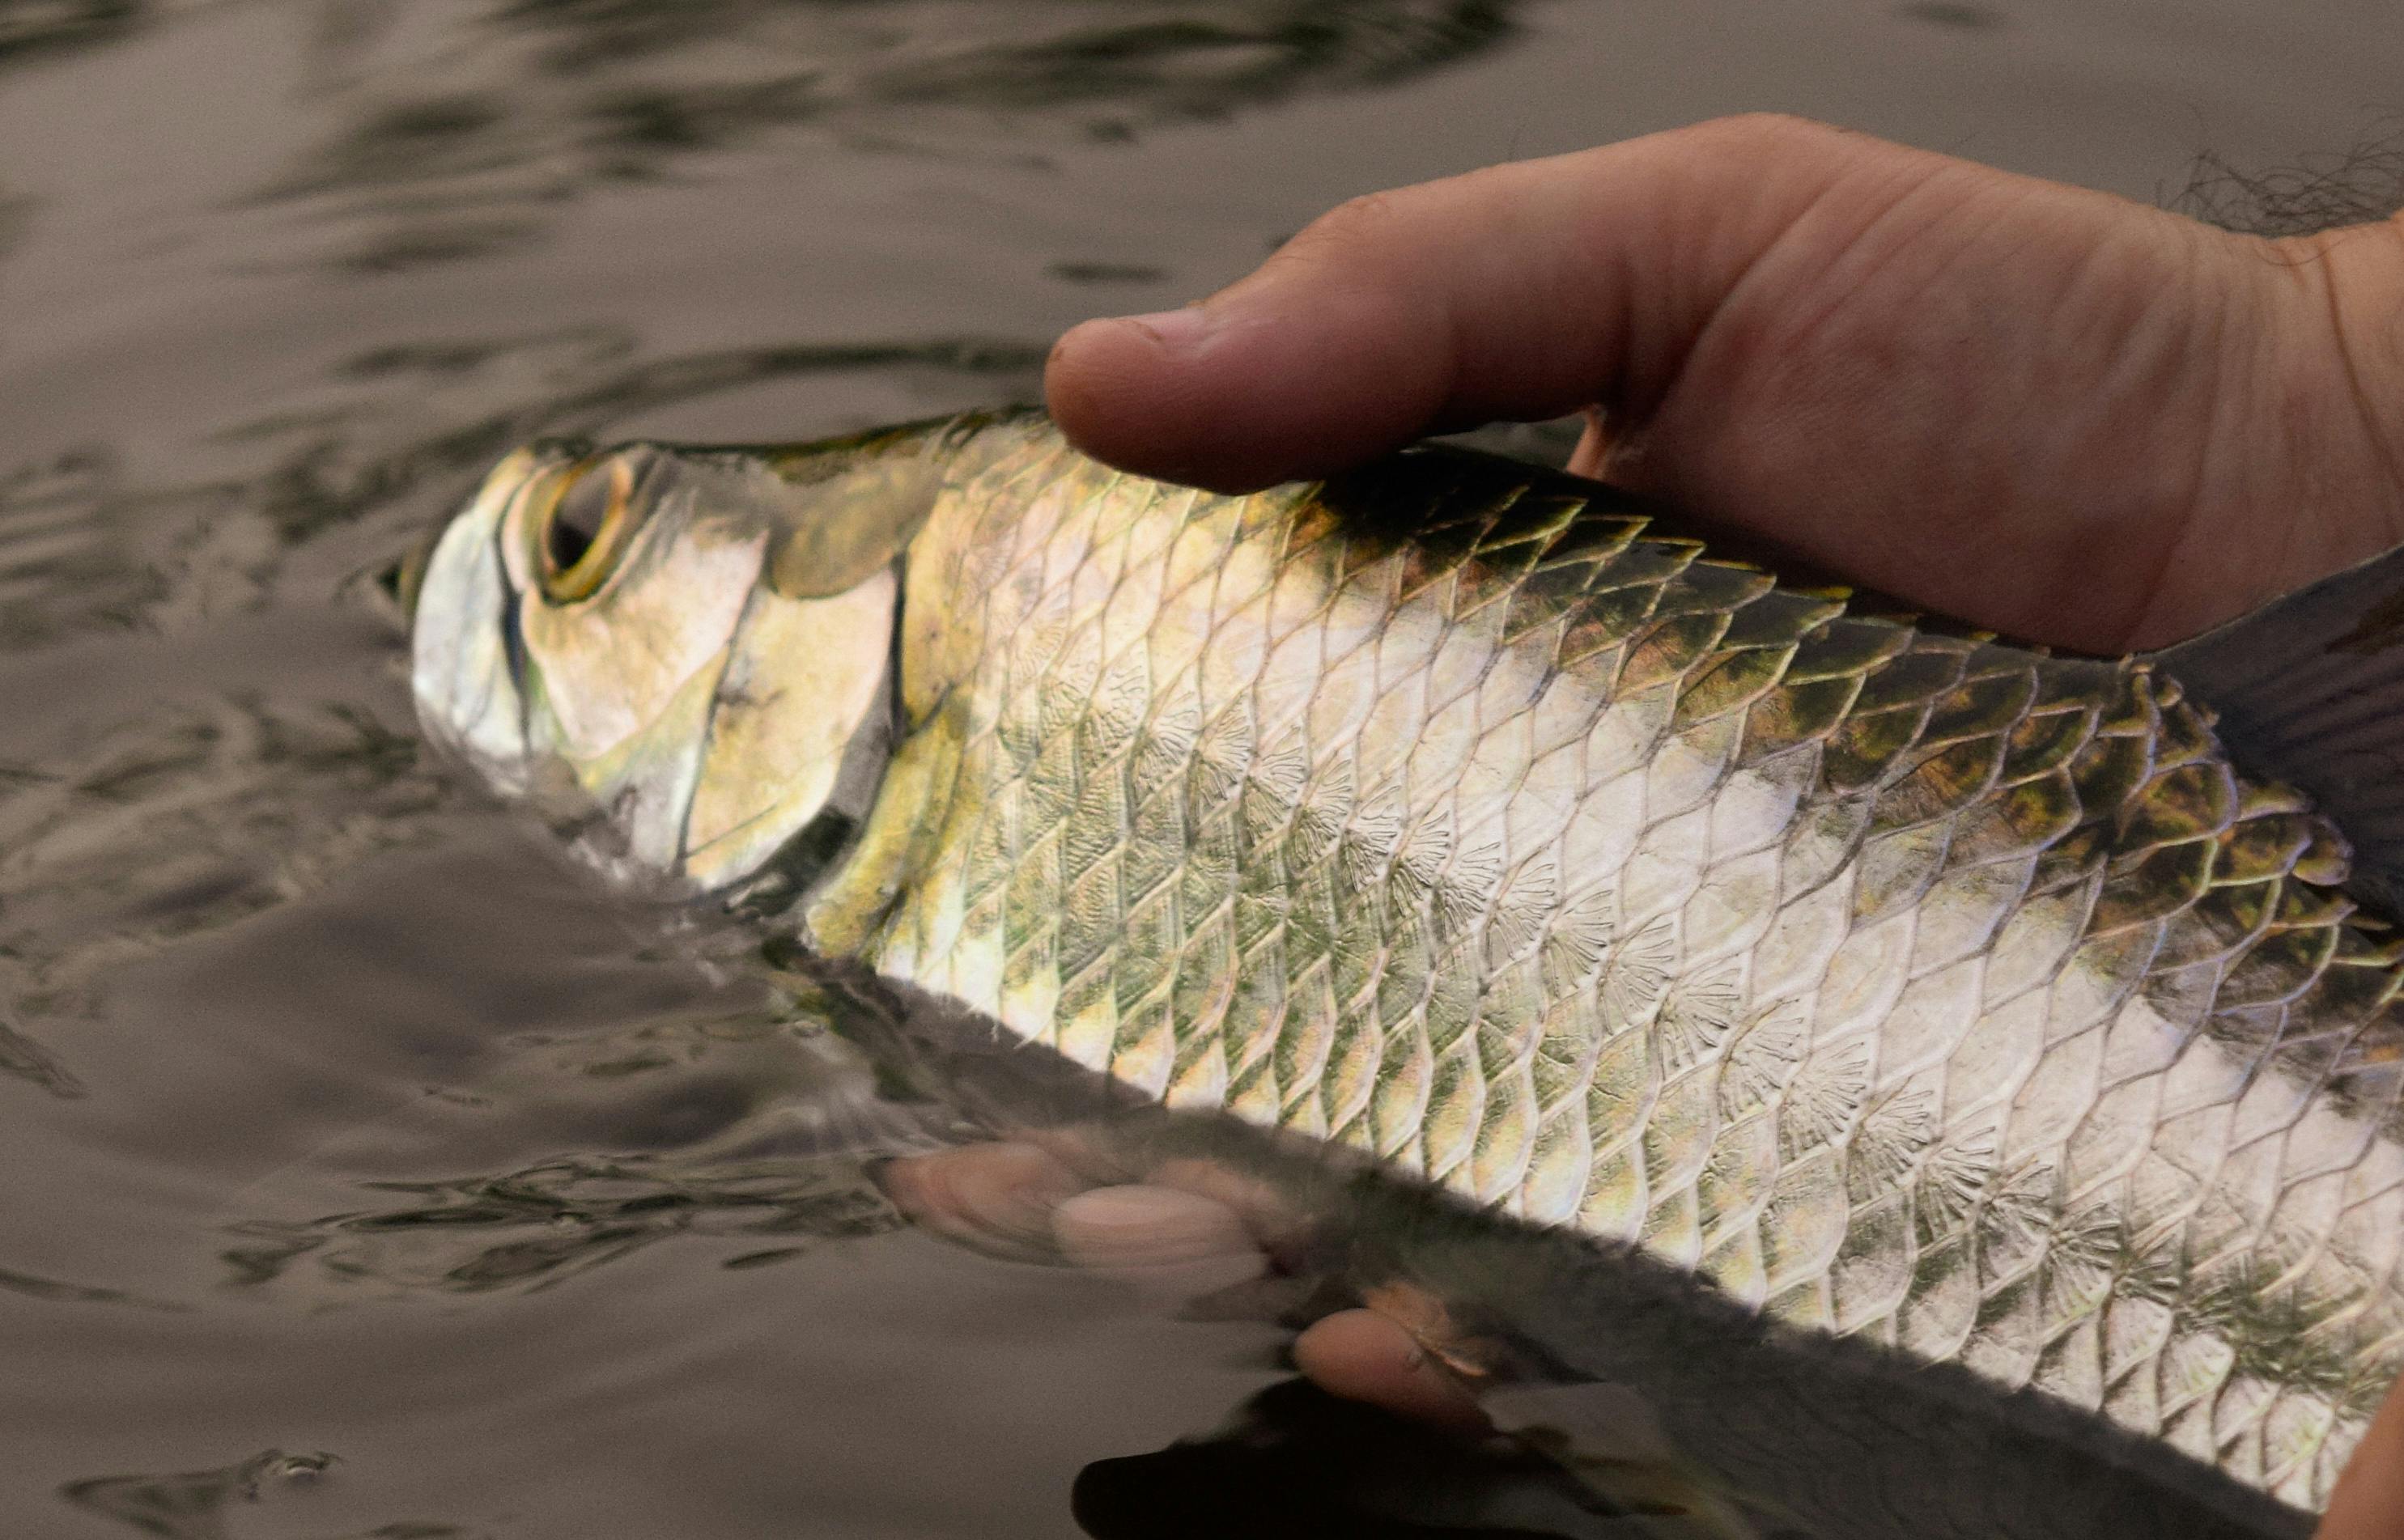 A close-up image of a fish that is partially submerged in the water, sitting in the author's hand. 